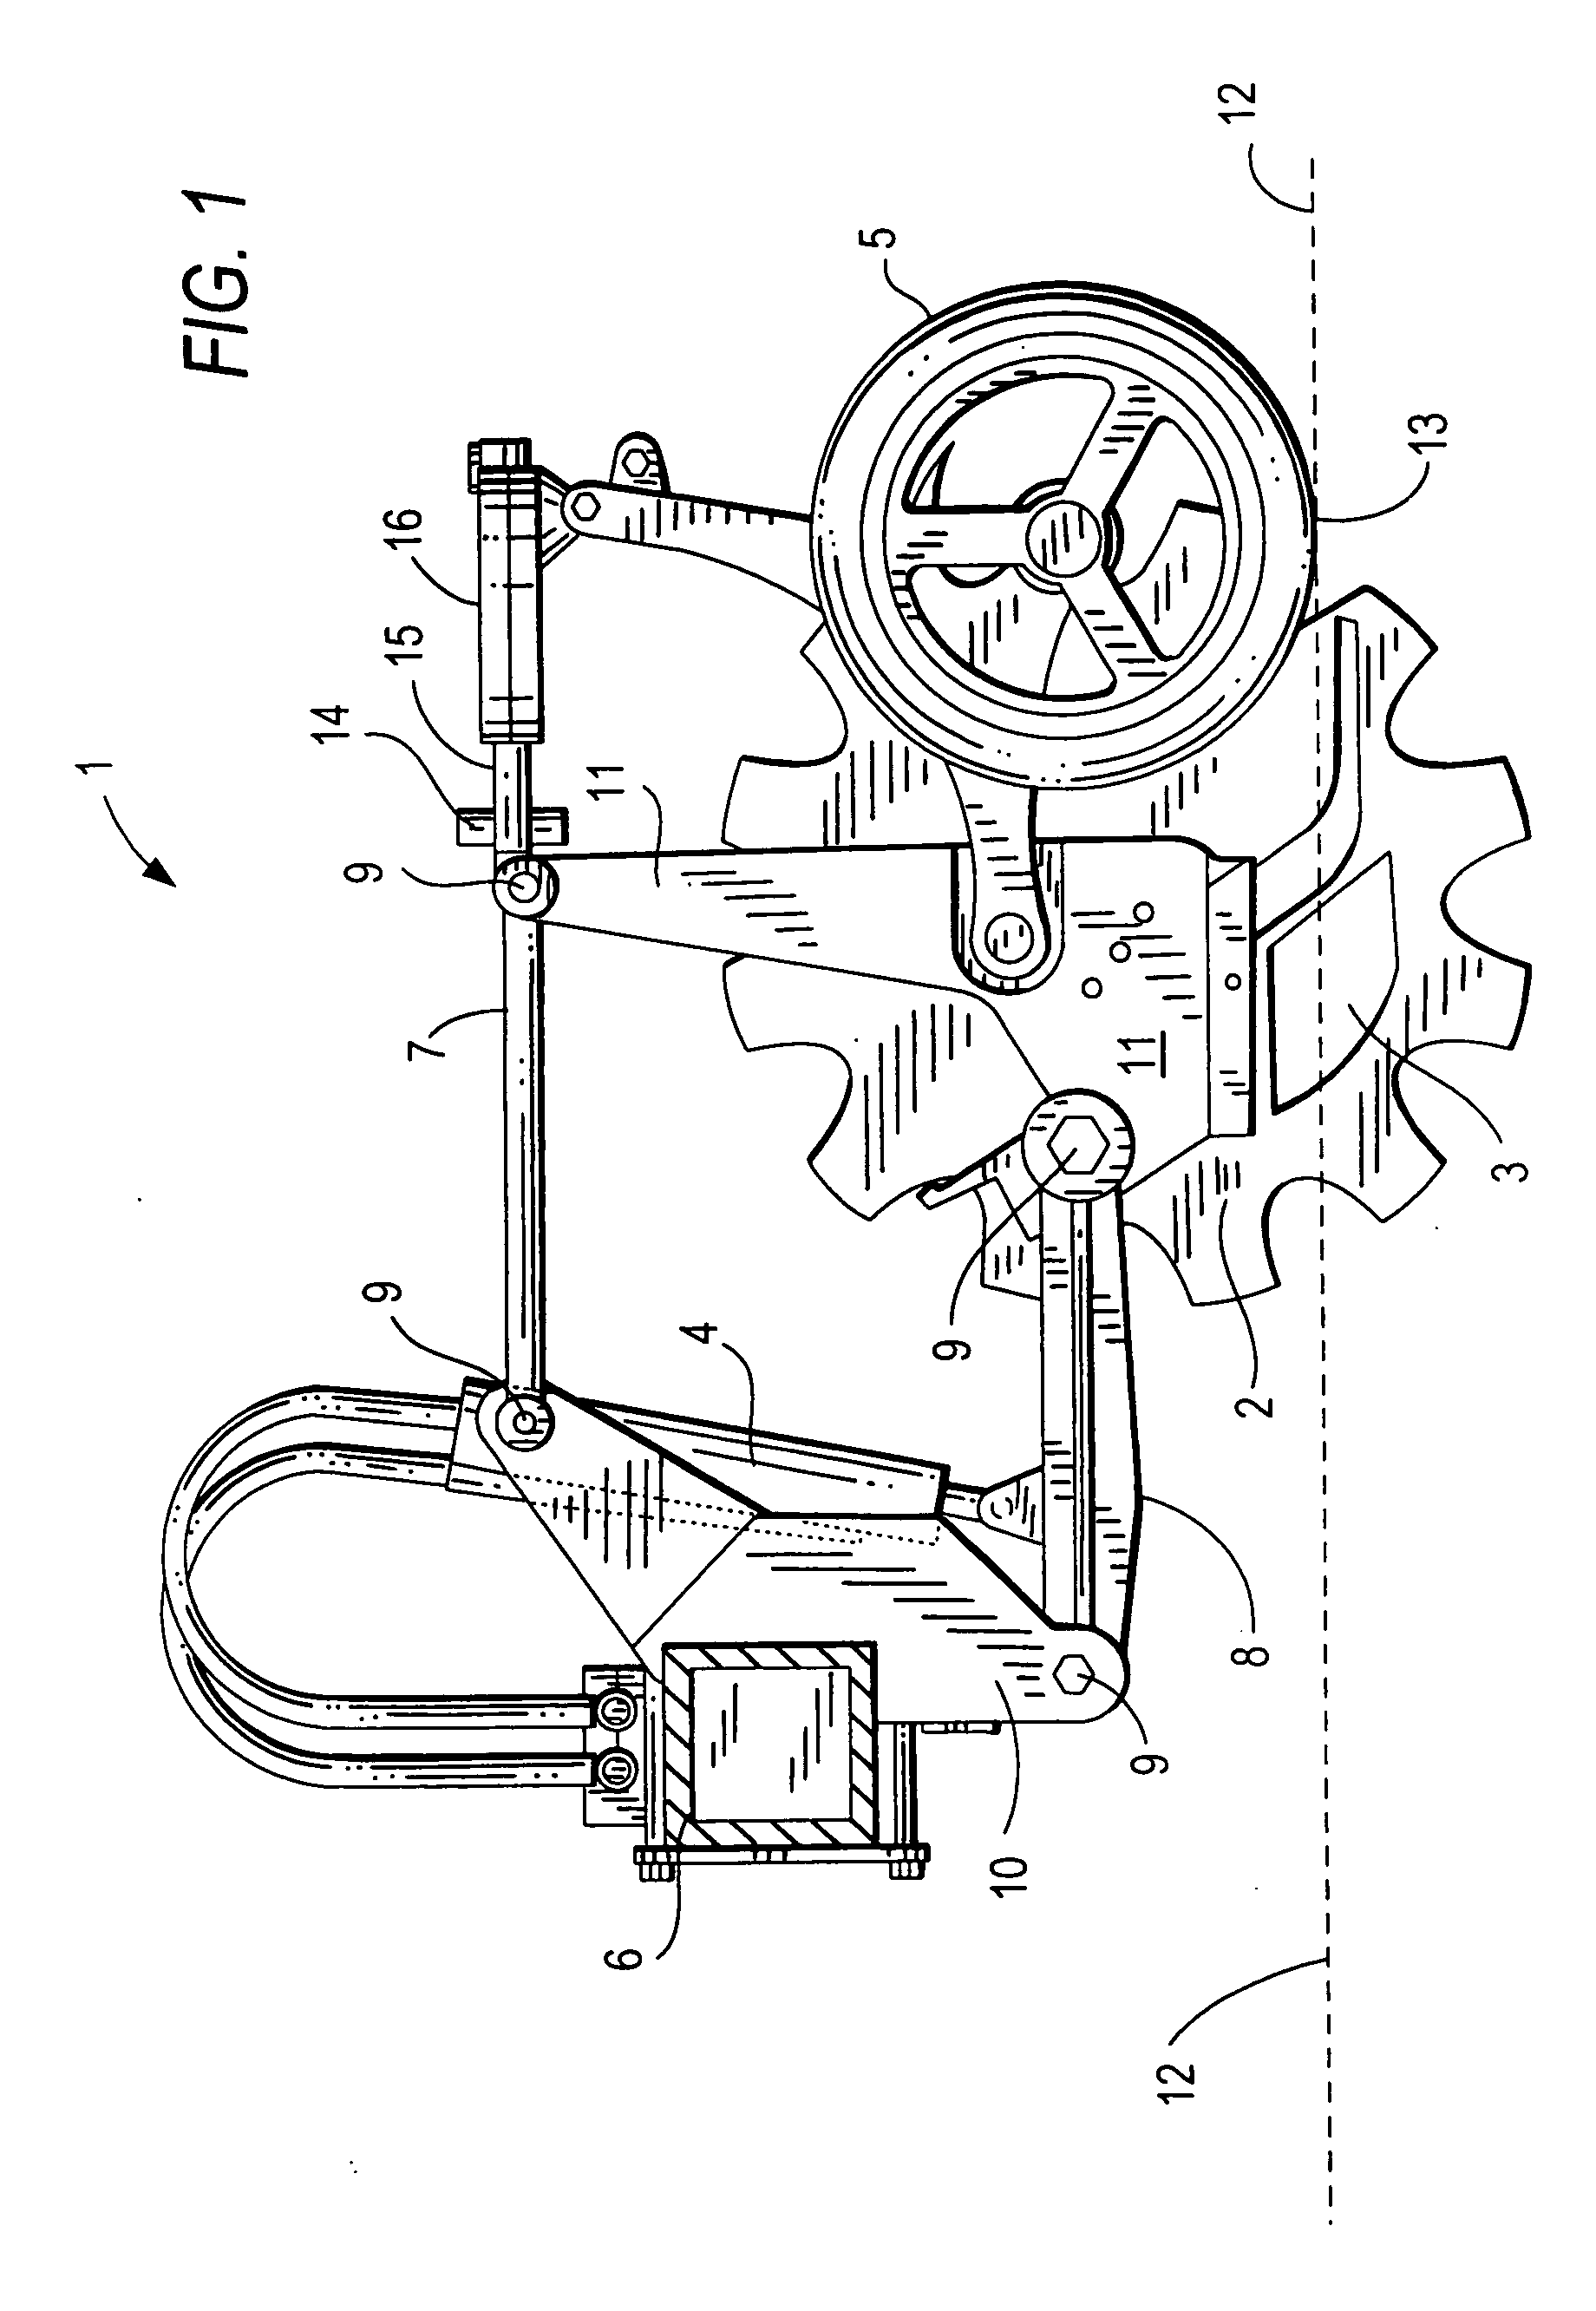 Ground opening device